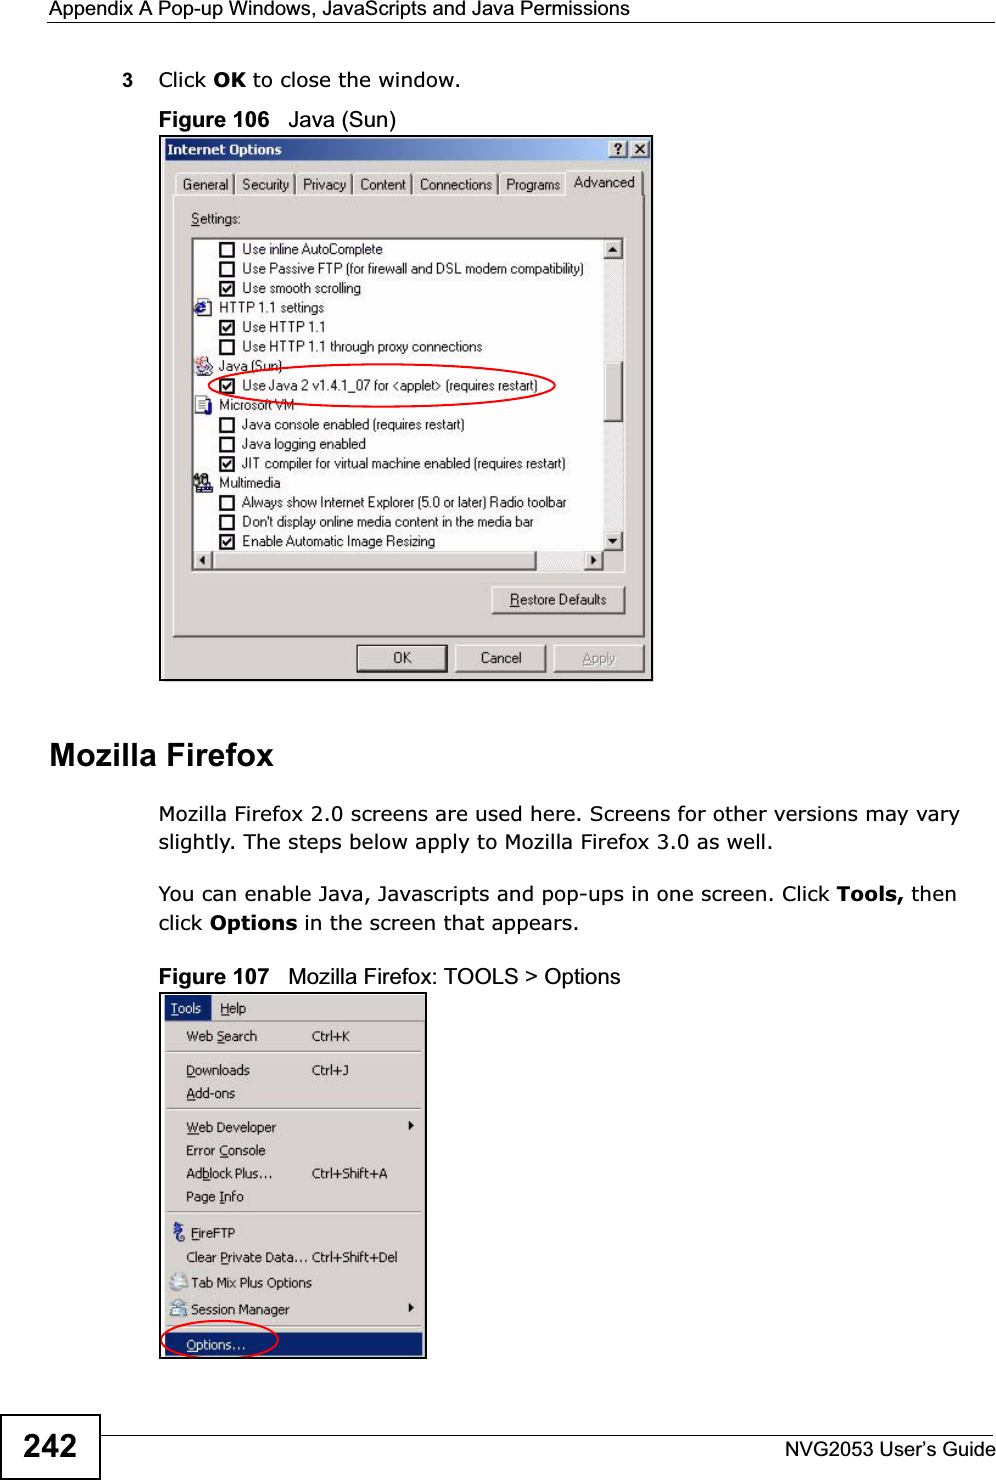 Appendix A Pop-up Windows, JavaScripts and Java PermissionsNVG2053 User’s Guide2423Click OK to close the window.Figure 106   Java (Sun)Mozilla FirefoxMozilla Firefox 2.0 screens are used here. Screens for other versions may vary slightly. The steps below apply to Mozilla Firefox 3.0 as well.You can enable Java, Javascripts and pop-ups in one screen. Click Tools, then click Options in the screen that appears.Figure 107   Mozilla Firefox: TOOLS &gt; Options